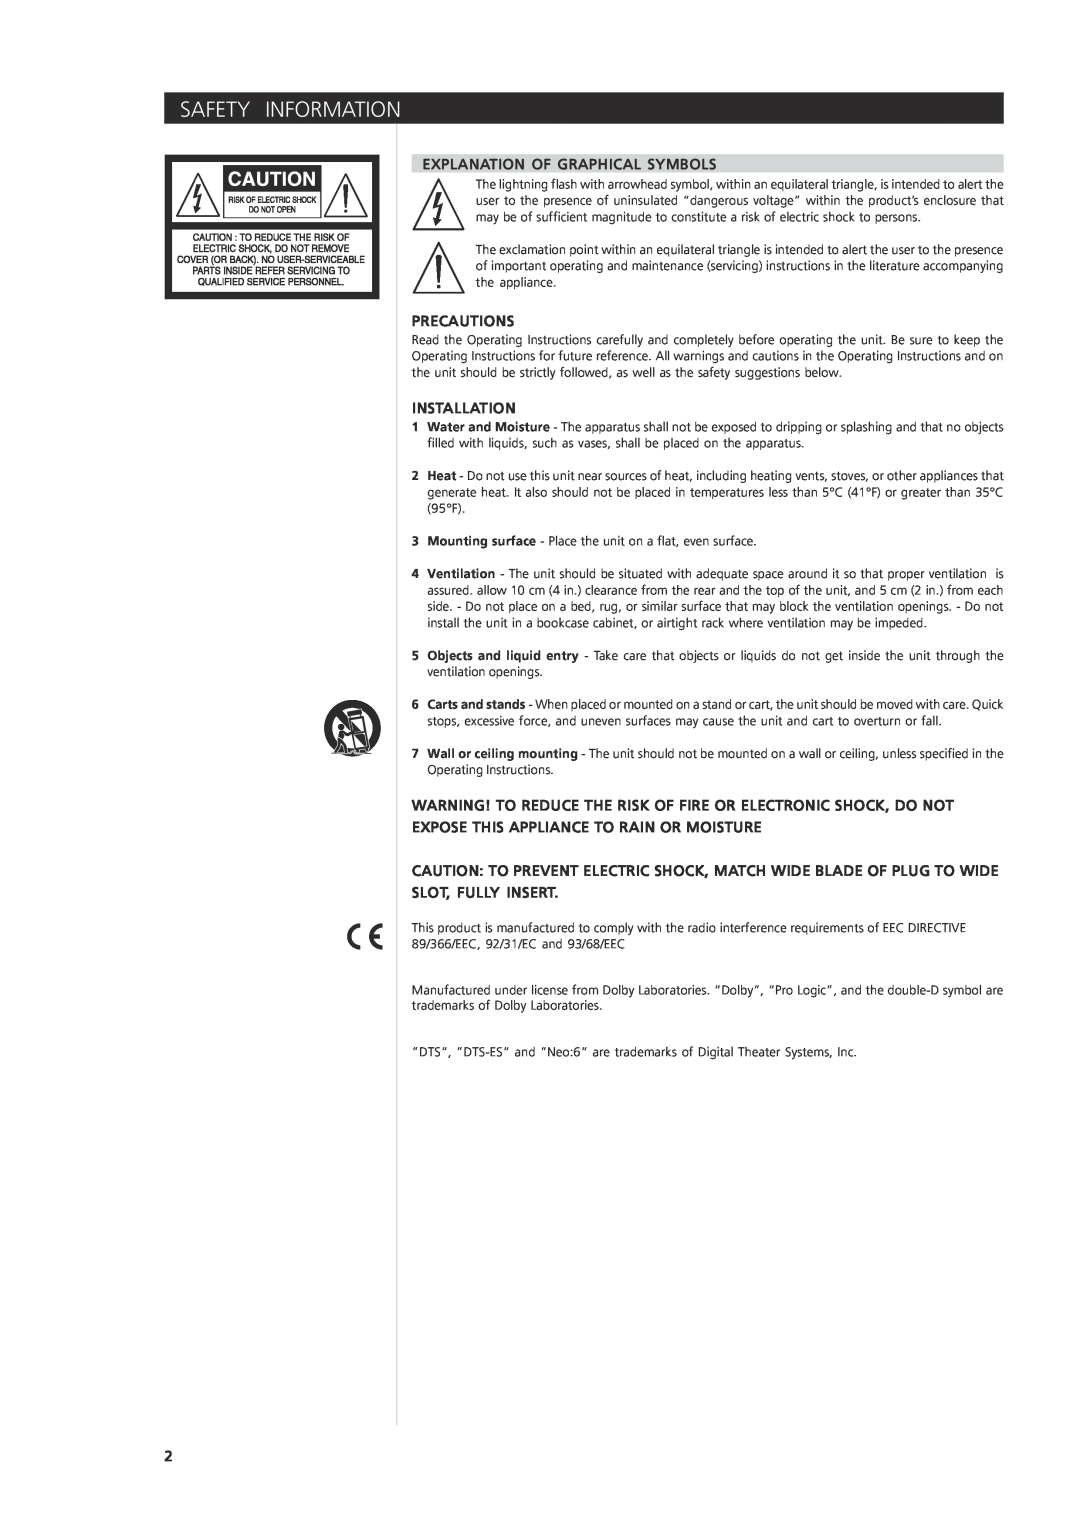 NAD T744 owner manual Safety Information, Explanation Of Graphical Symbols, Precautions, Installation, Slot, Fully Insert 